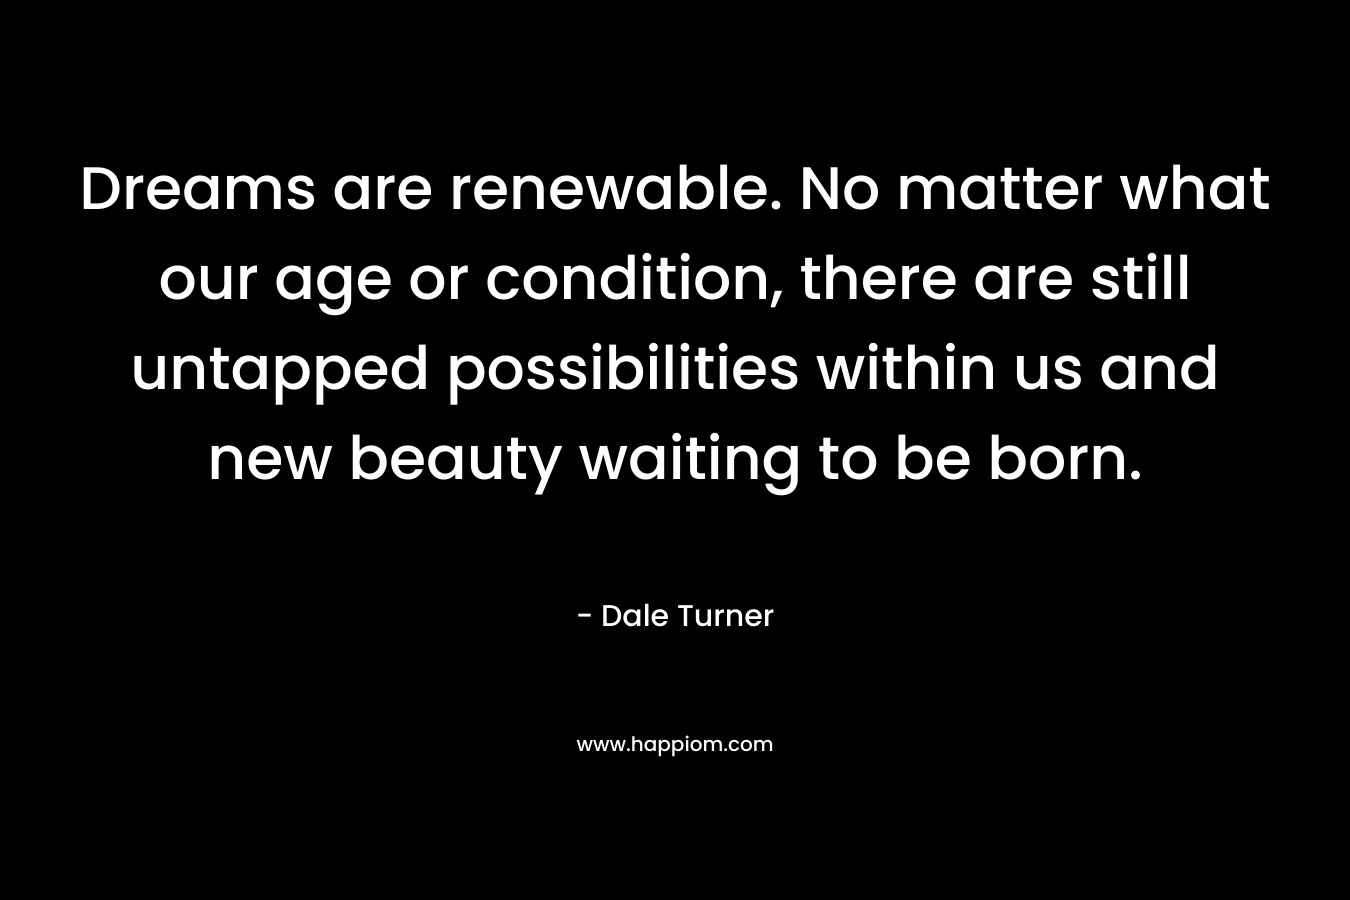 Dreams are renewable. No matter what our age or condition, there are still untapped possibilities within us and new beauty waiting to be born. – Dale Turner